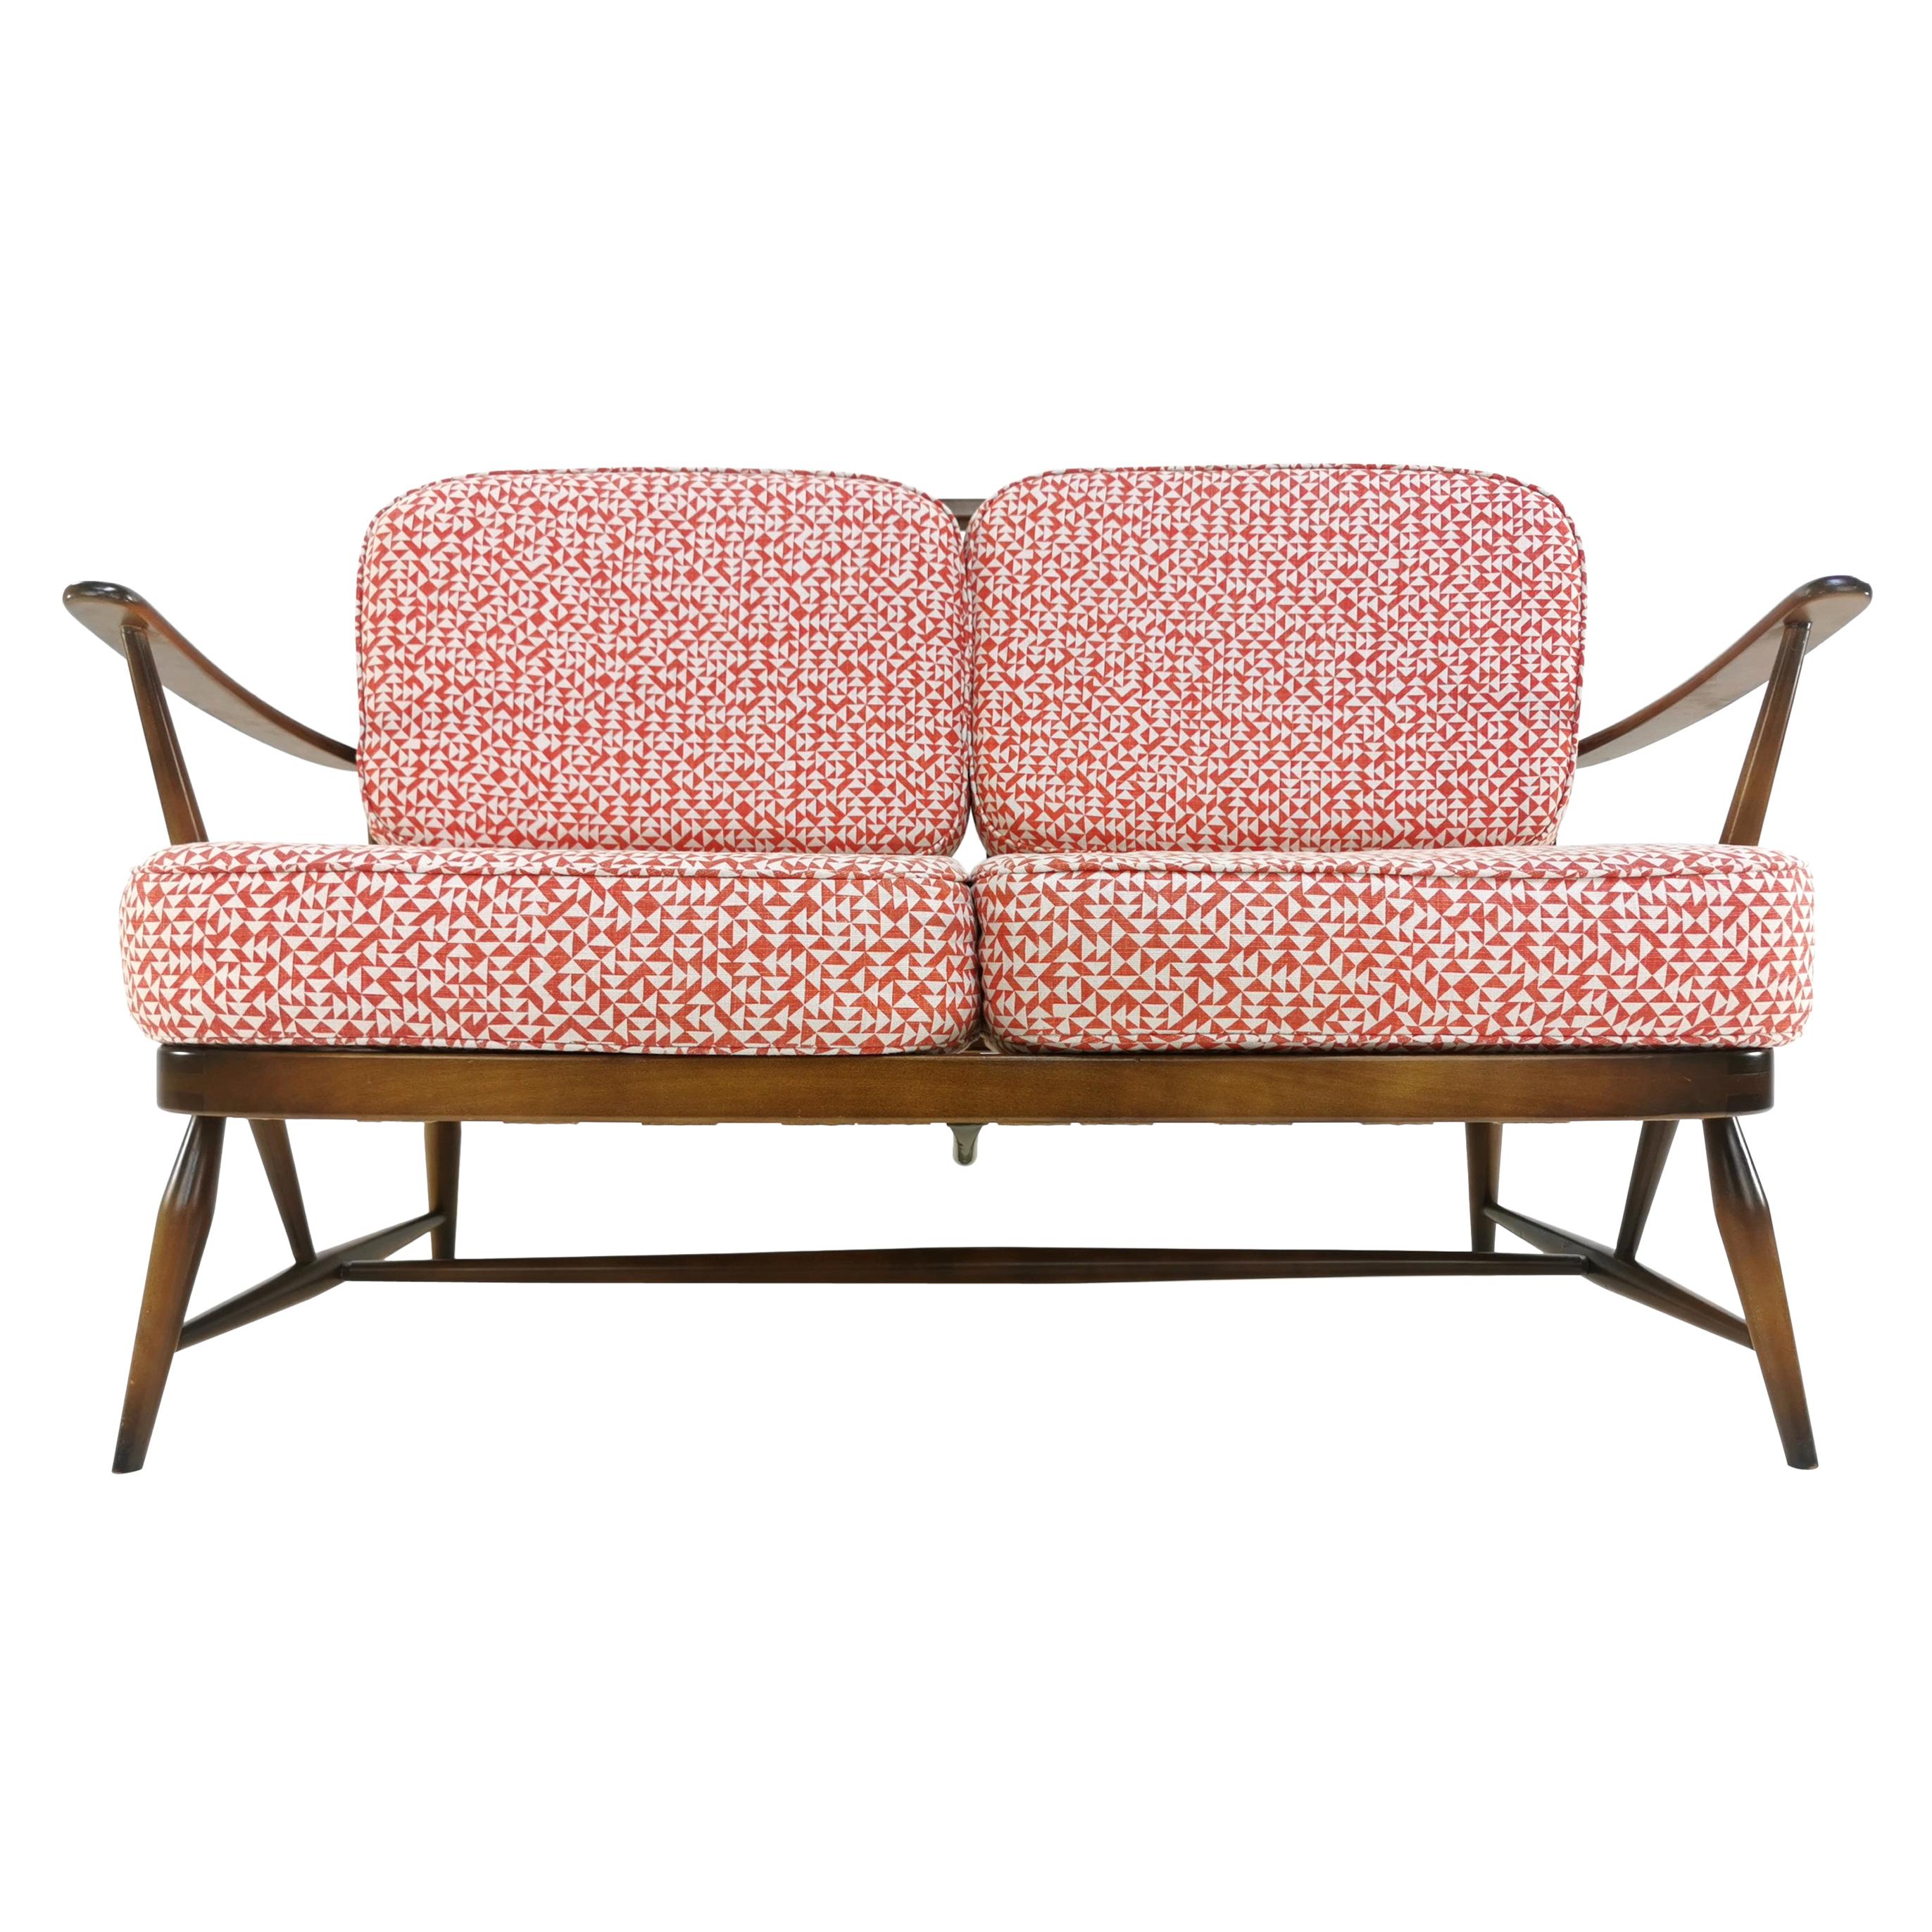 Vintage Ercol Windsor Two-Seat Sofa Midcentury at 1stDibs